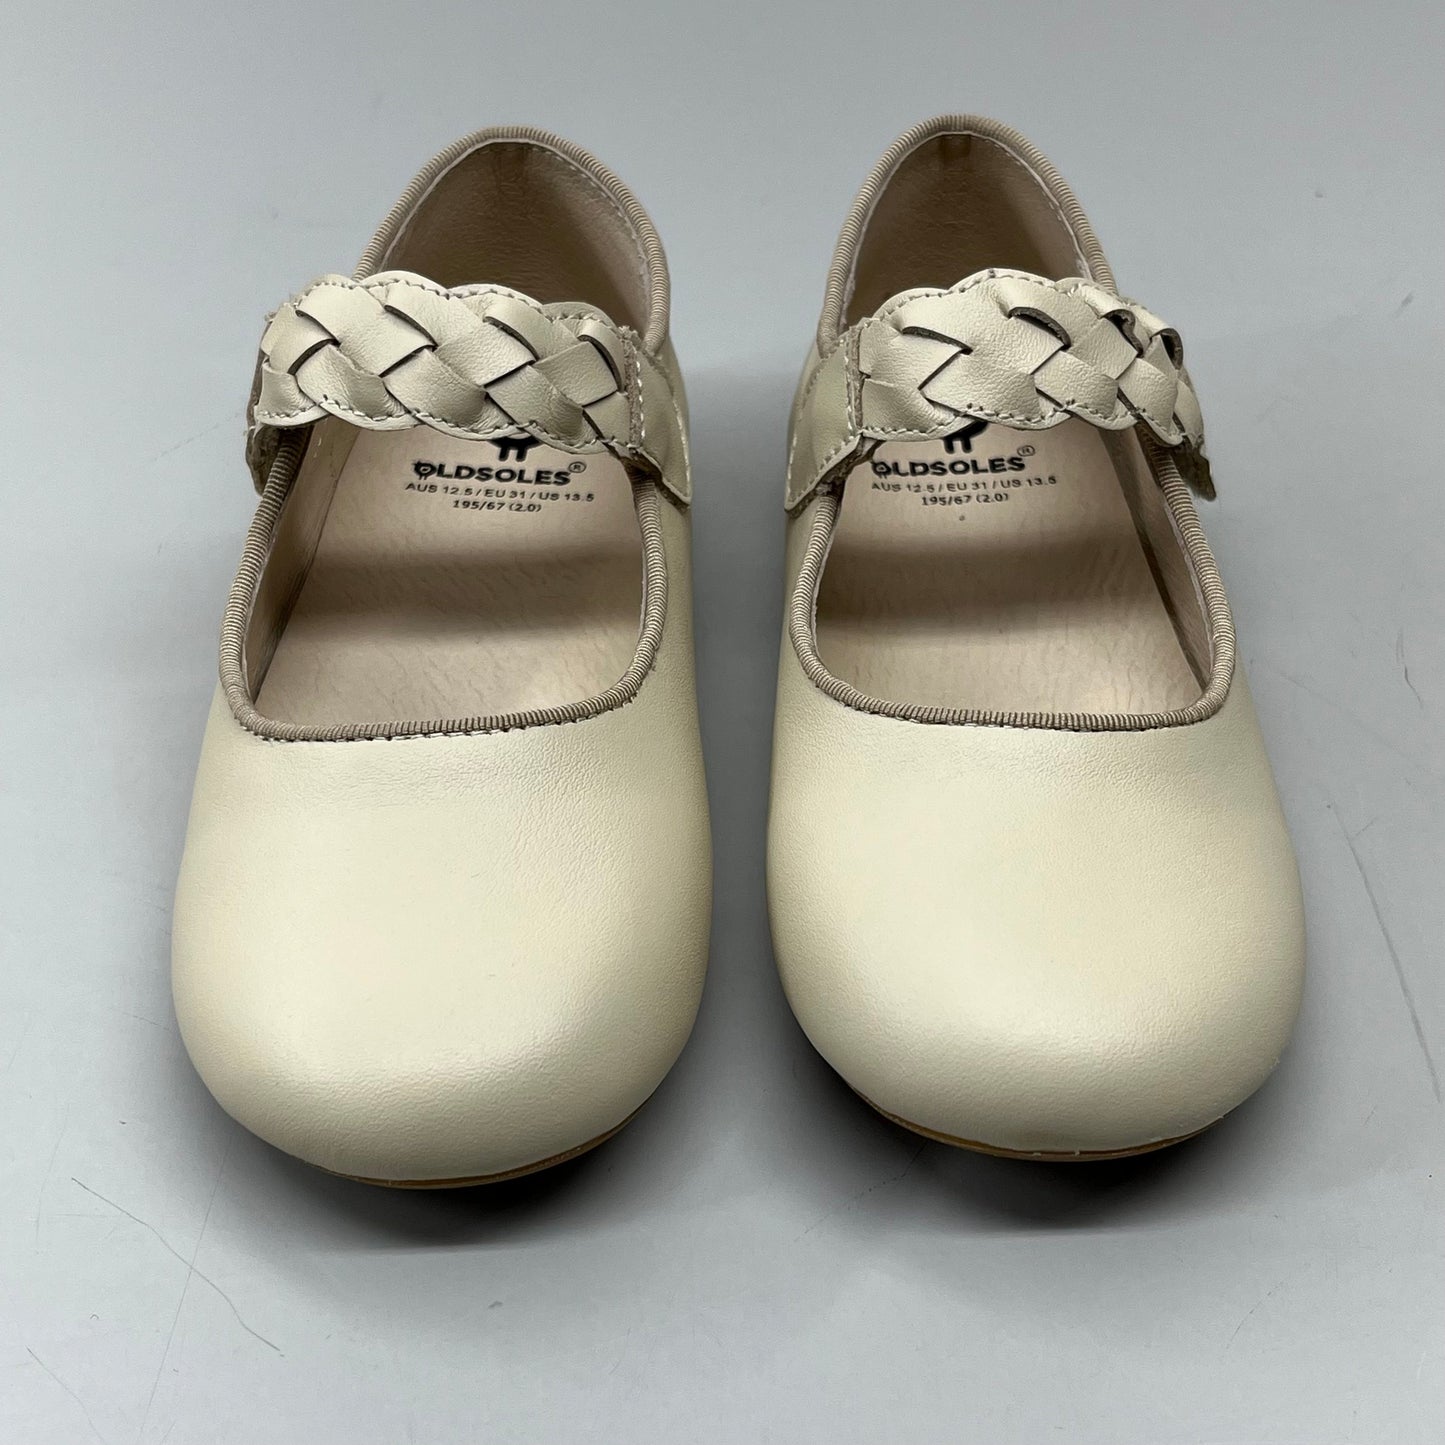 OLD SOLES Lady Plat Braided Strap Leather Shoe Kid’s Sz 26 US 9.5 Cream #817